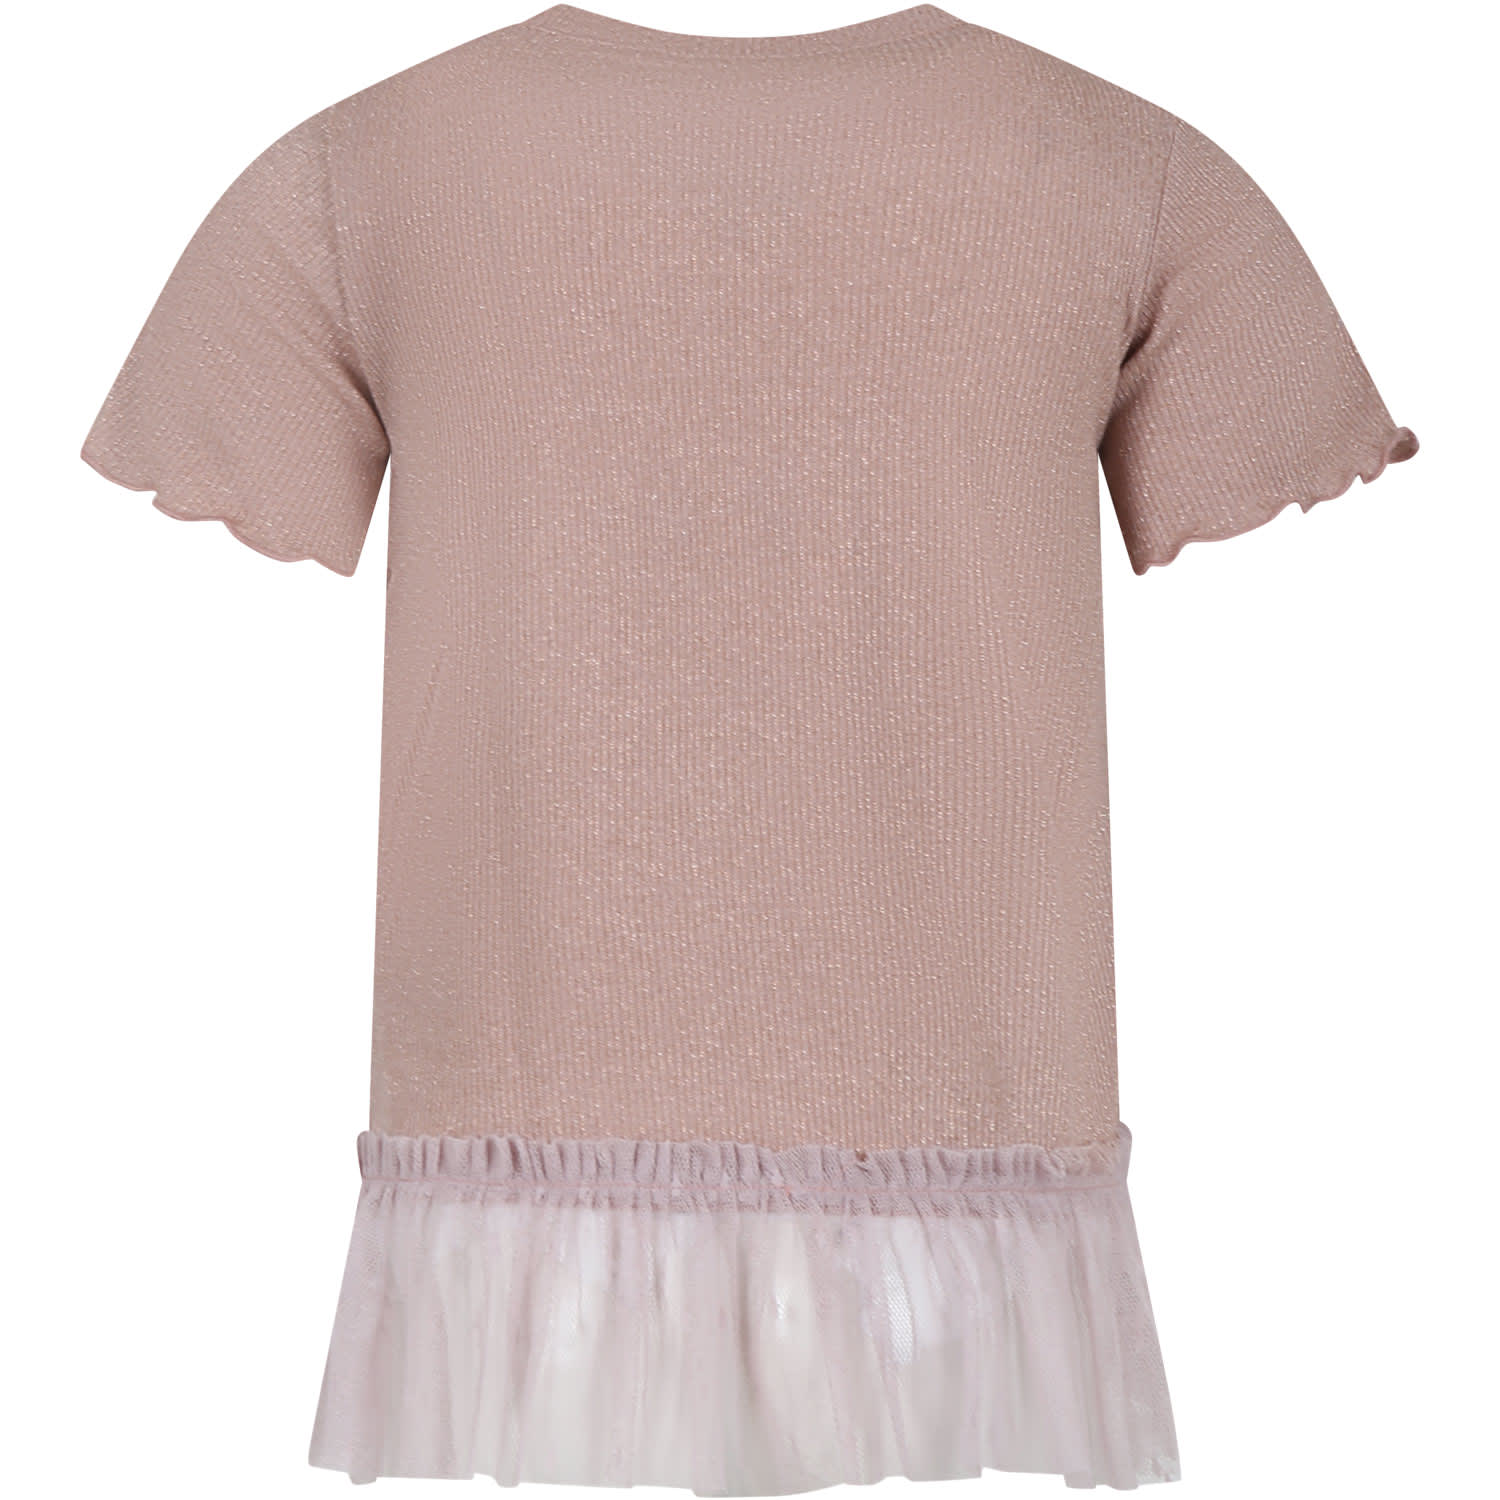 Shop Caffe' D'orzo Pink T-shirt Suit For Girl With Tulle